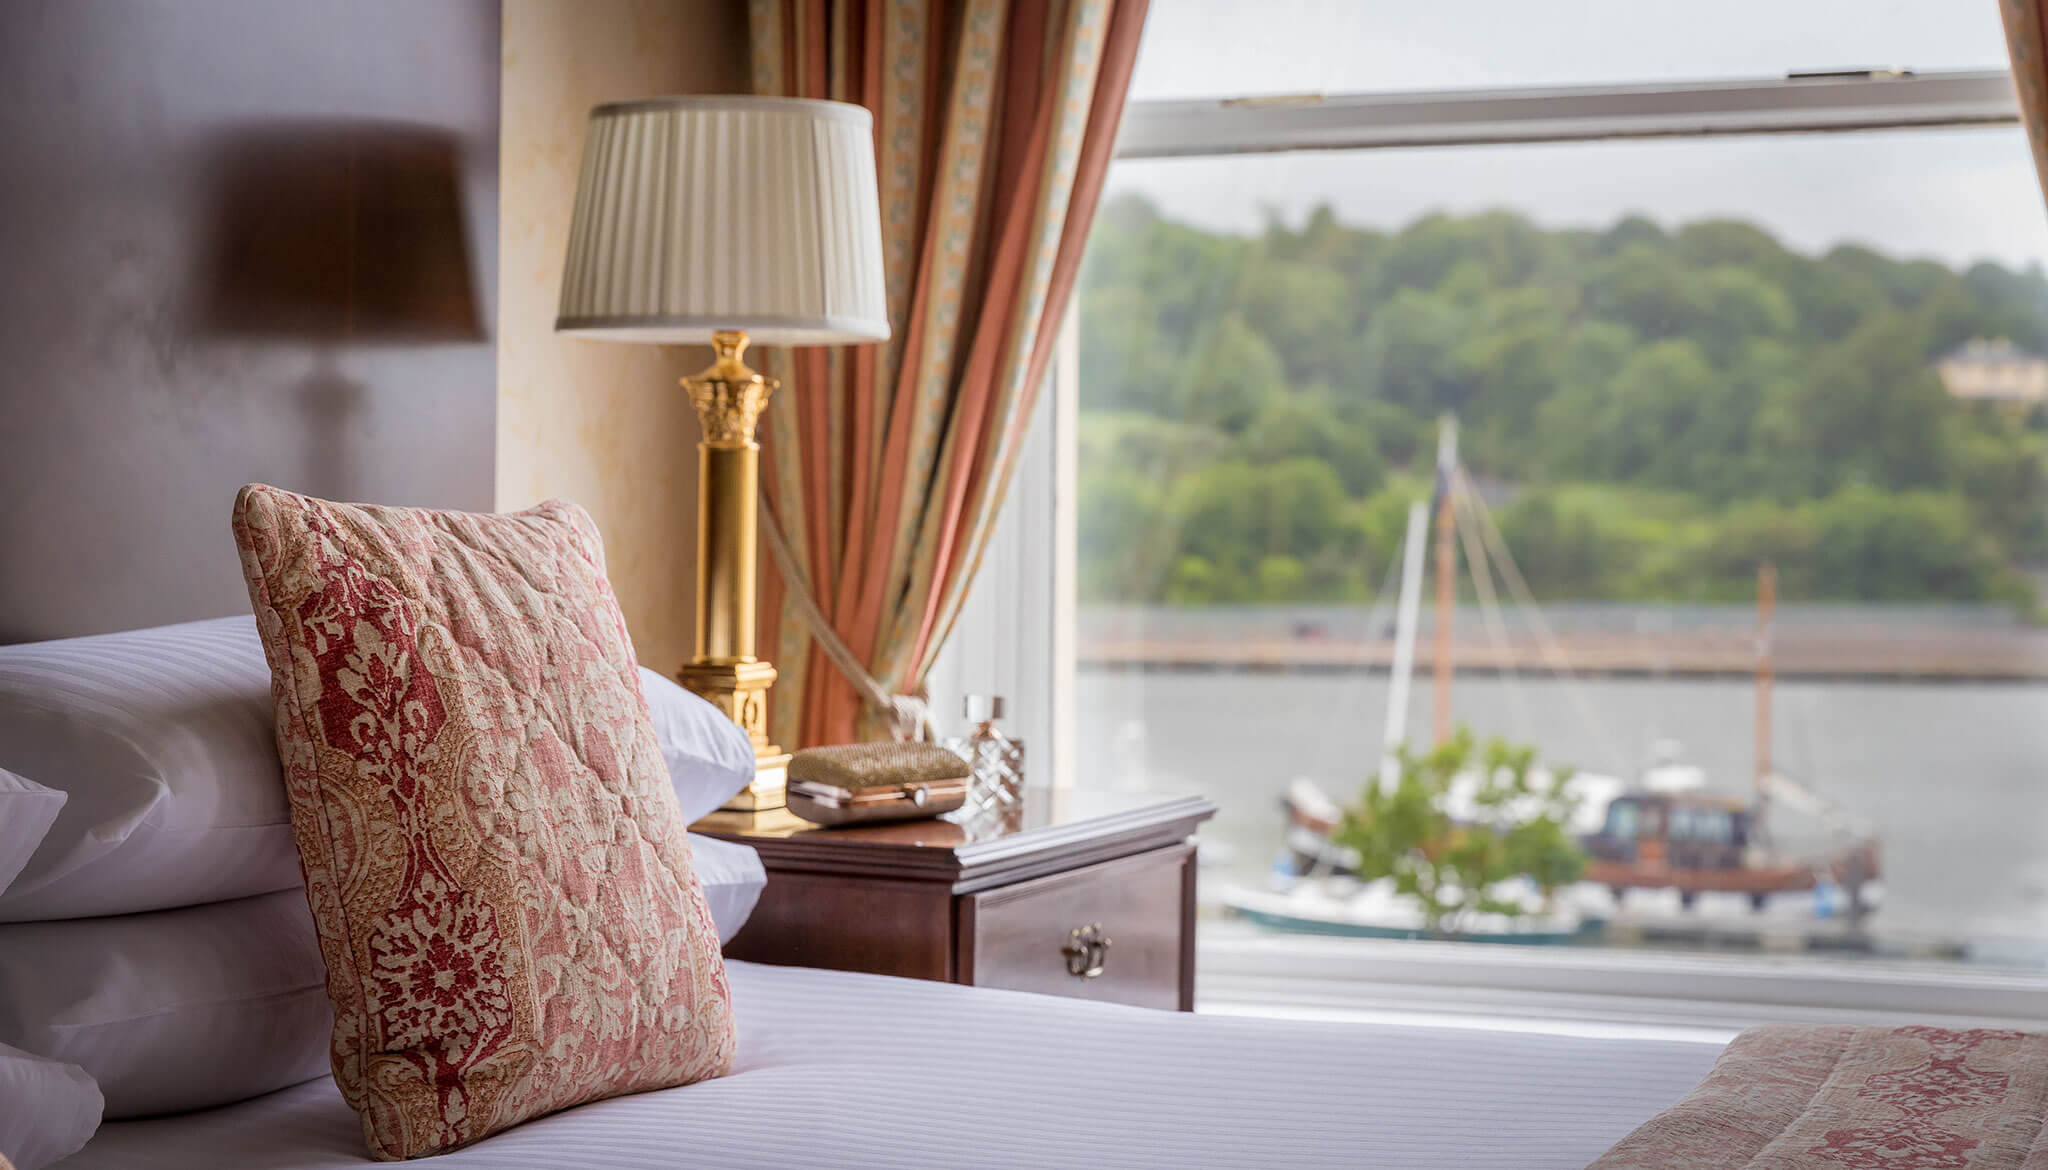 Looking for an iconic hotel experience in Waterford? Here are just some of our favourite experiences at The Granville Hotel.